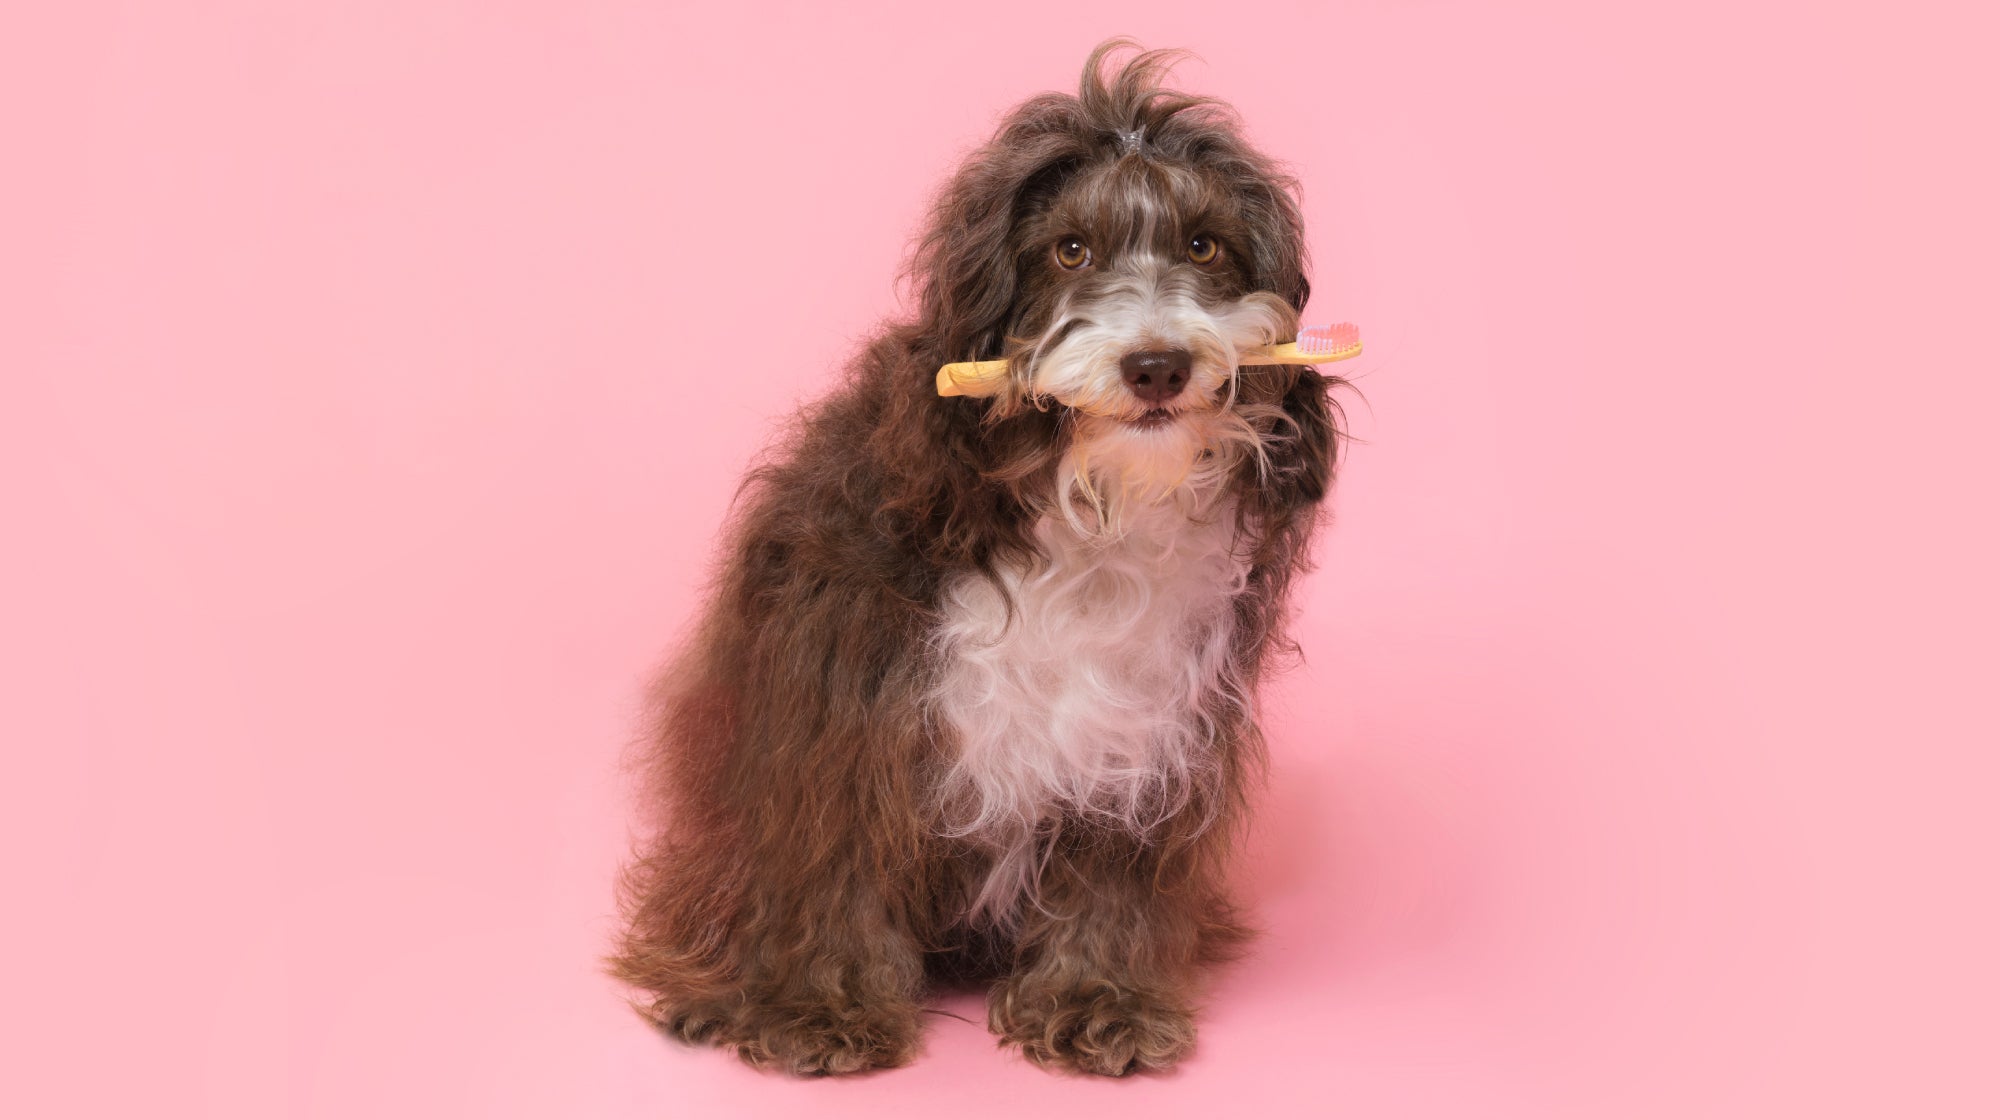 shaggy dog holding a toothbrush in it's mouth on a pink background